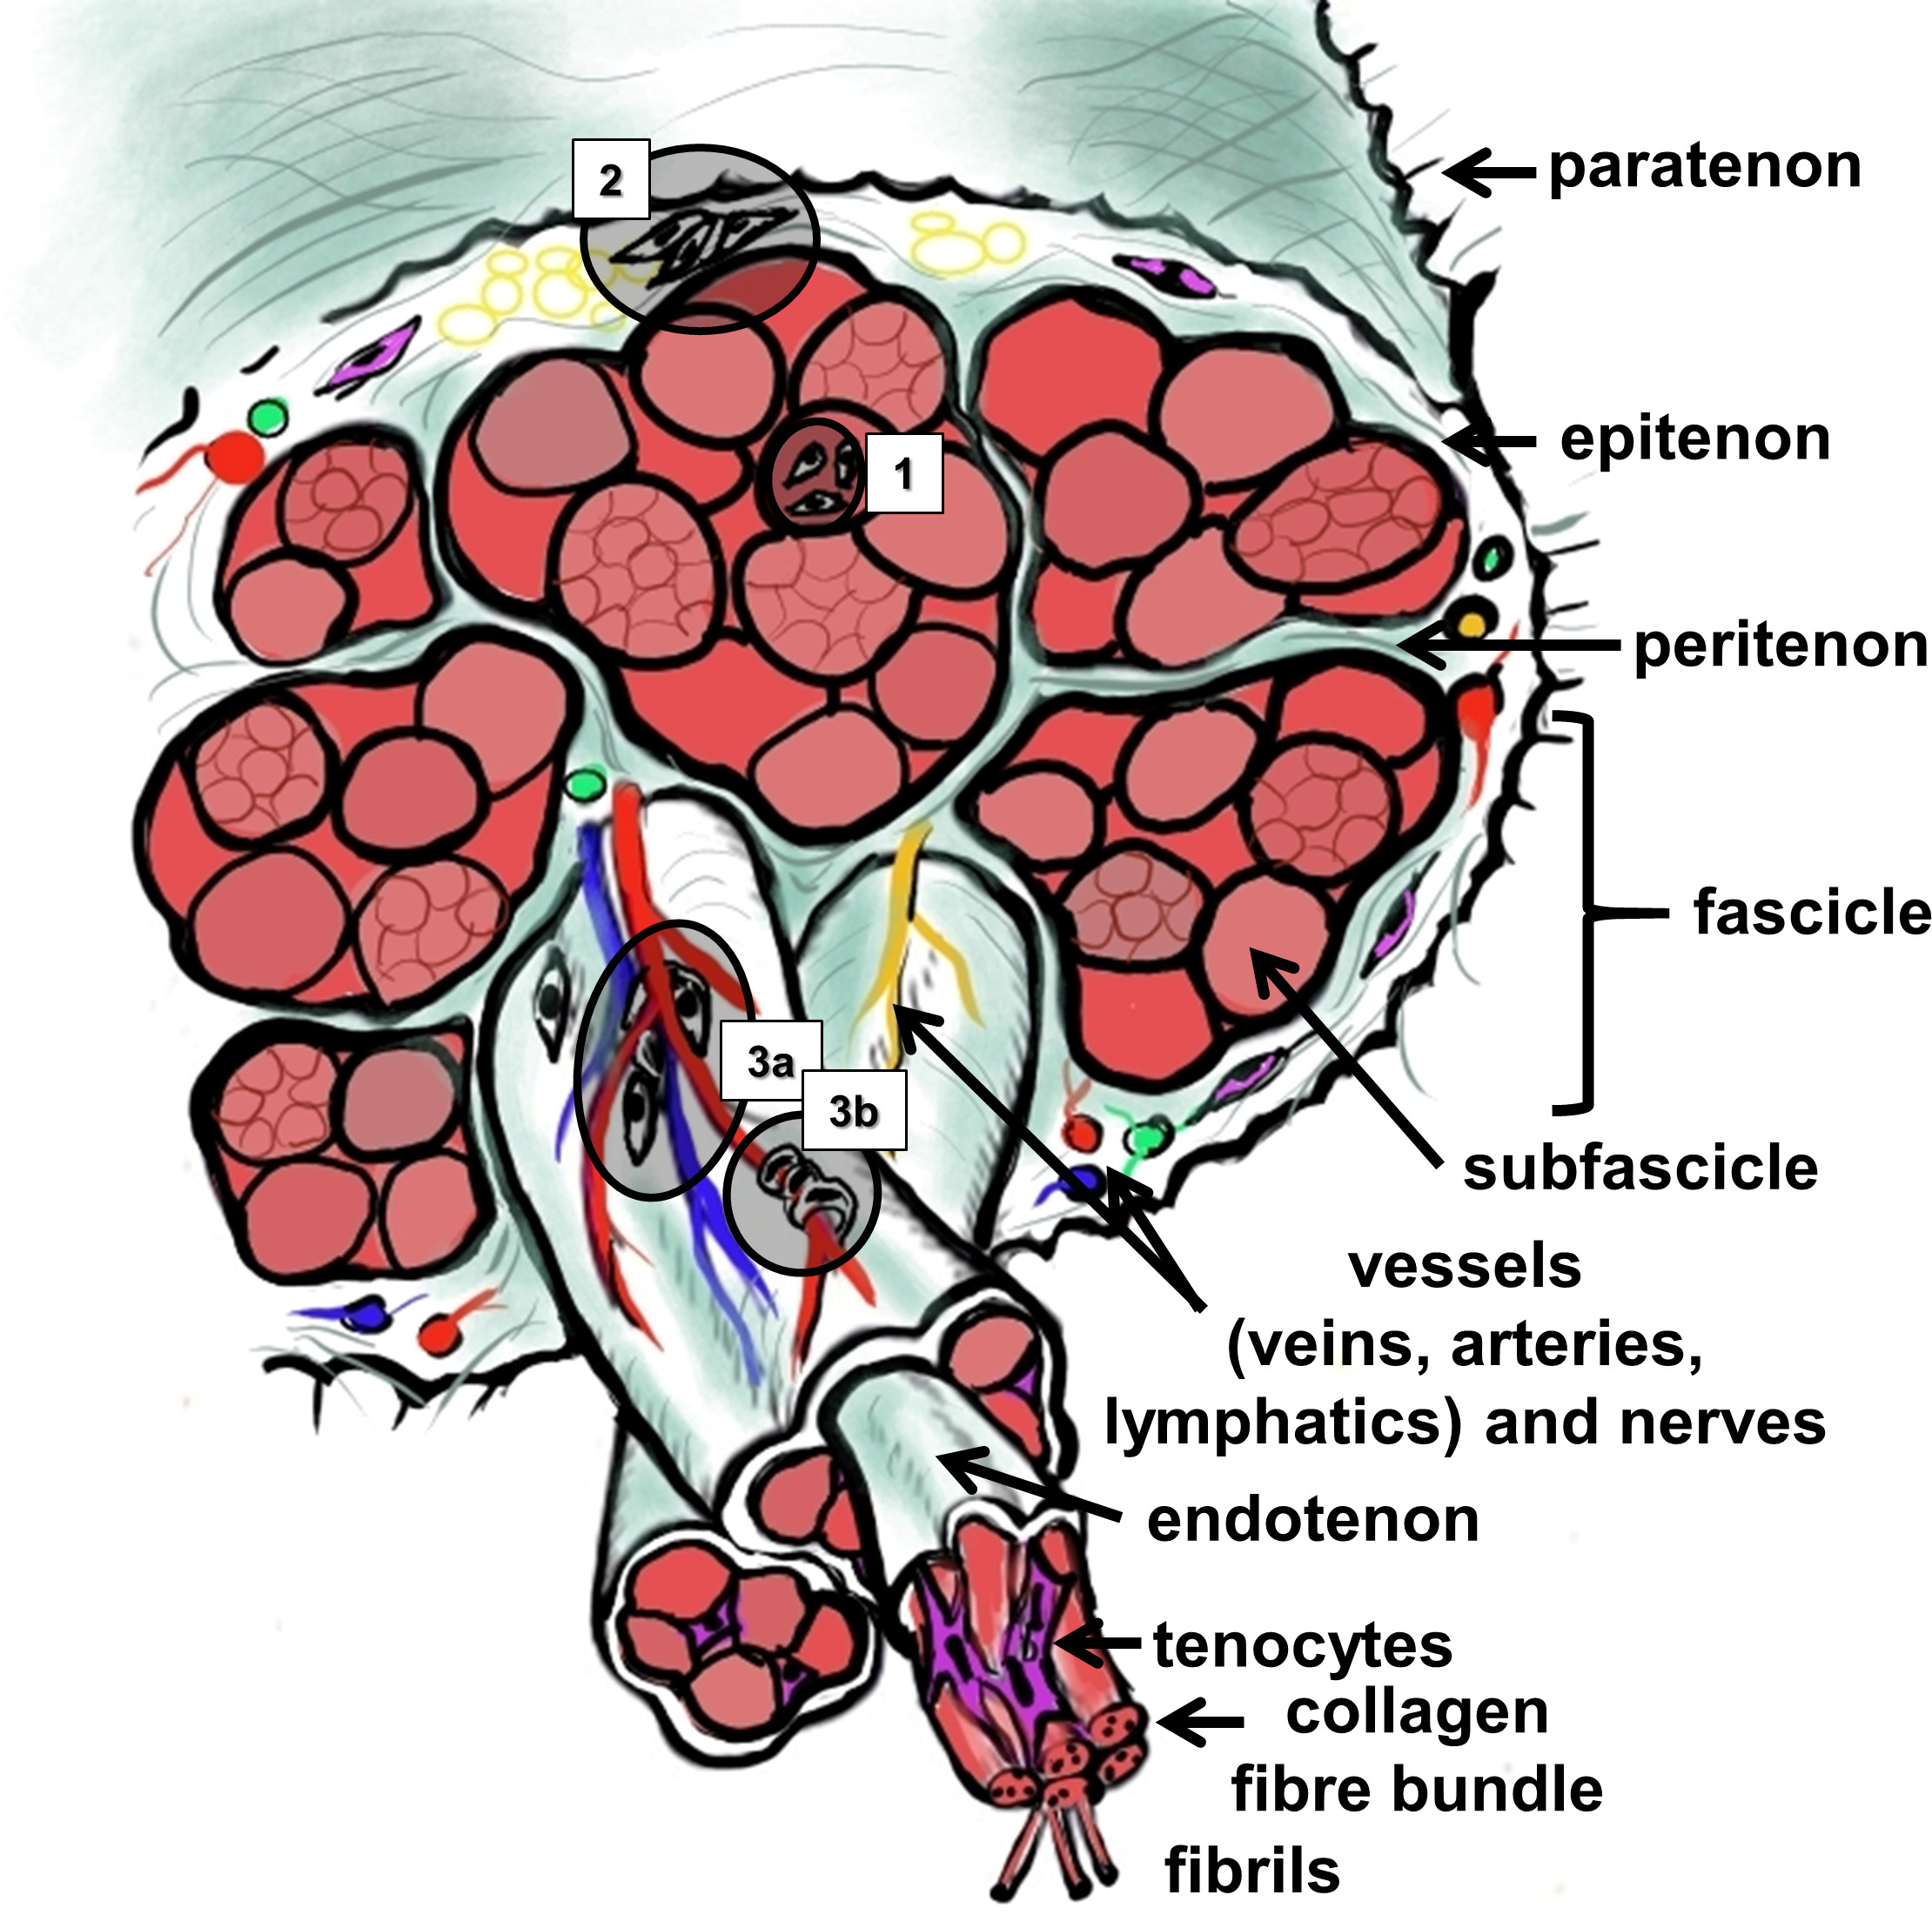 Fig. 2 
            Scheme of the microscopic anatomy of the Achilles tendon. The stem cell niches are numbered (1: within the tendon proper; 2: within the epi/paratenon; interfascicular niches comprise 3a: perivascular; and 3b: niches within the wall of small vessels, containing pericytes). The image was created by G. G. Schulze-Tanzil using Krita 4.1.7 (Krita Foundation, The Netherlands).
          